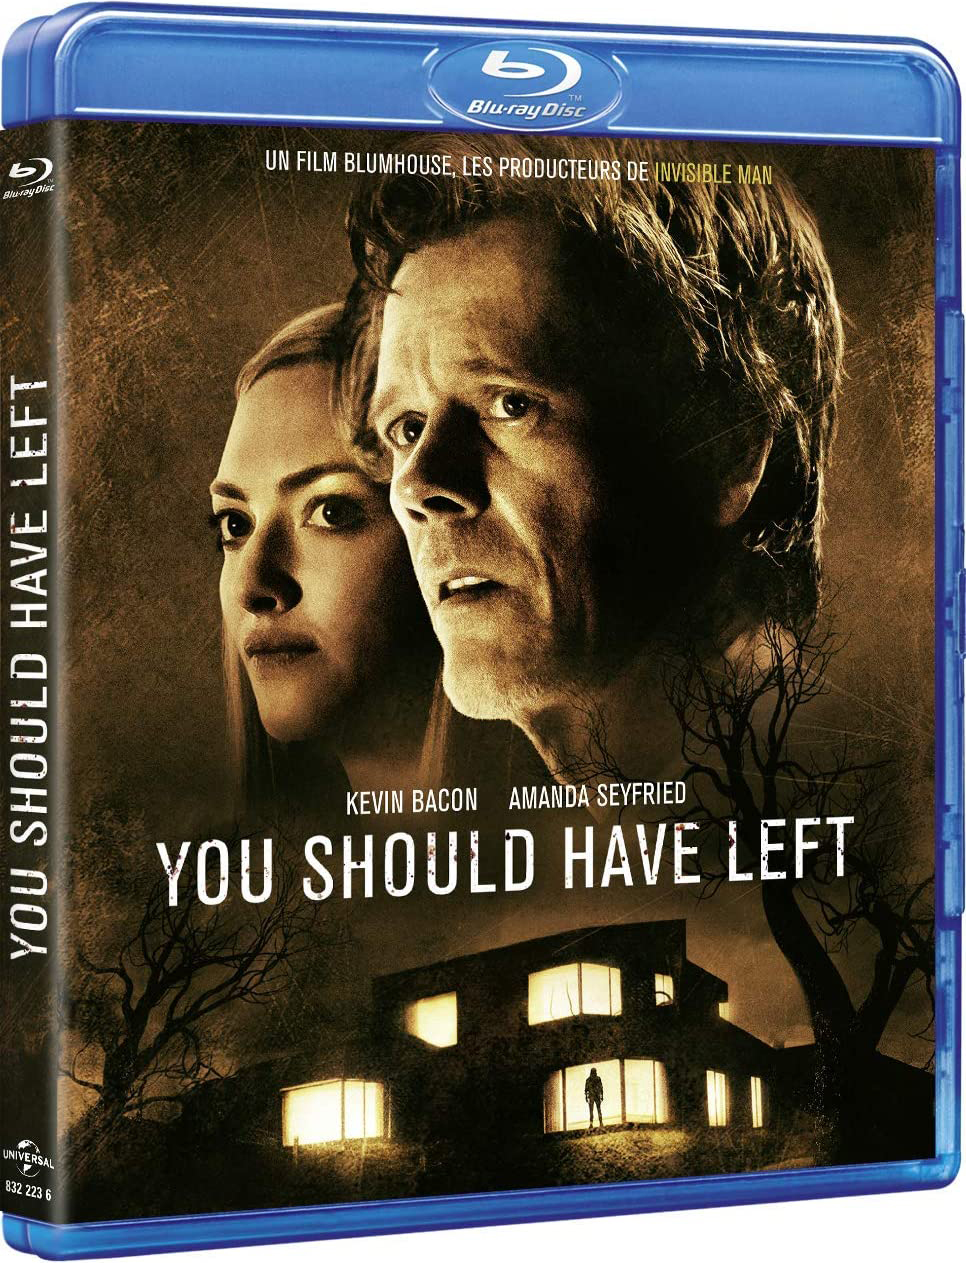 You Should Have Left Blu-ray Release Date October 28, 2020 (France)